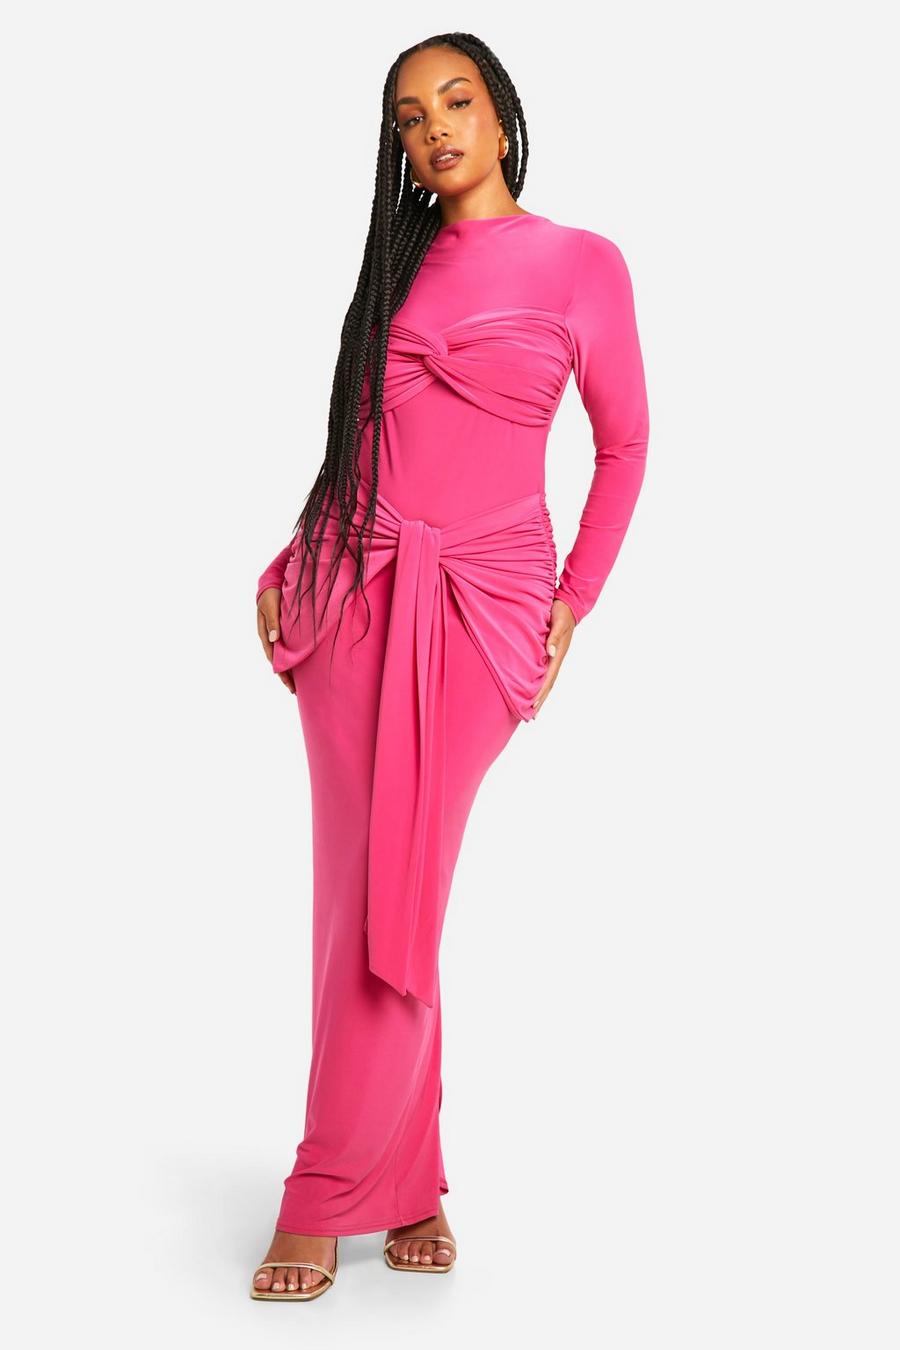 Hot pink Plus Double Slinky Ruched Tie Maxi Dress